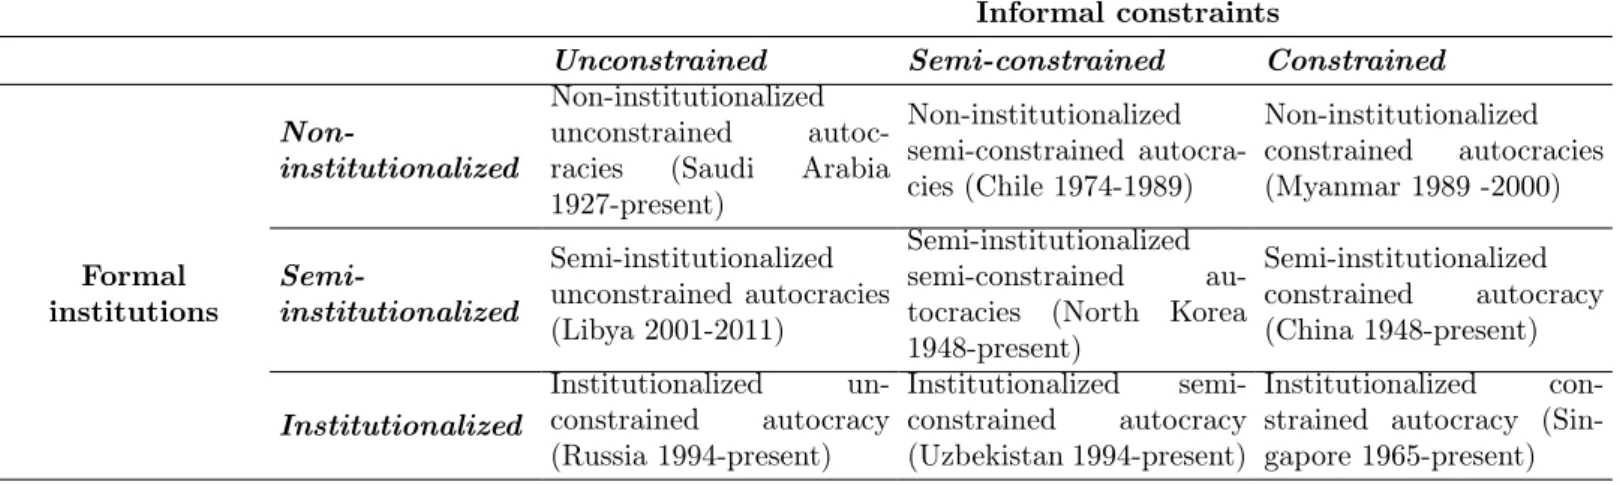 Table 2: Classification of authoritarian regimes based on formal institutionalization and informal constraints Informal constraints